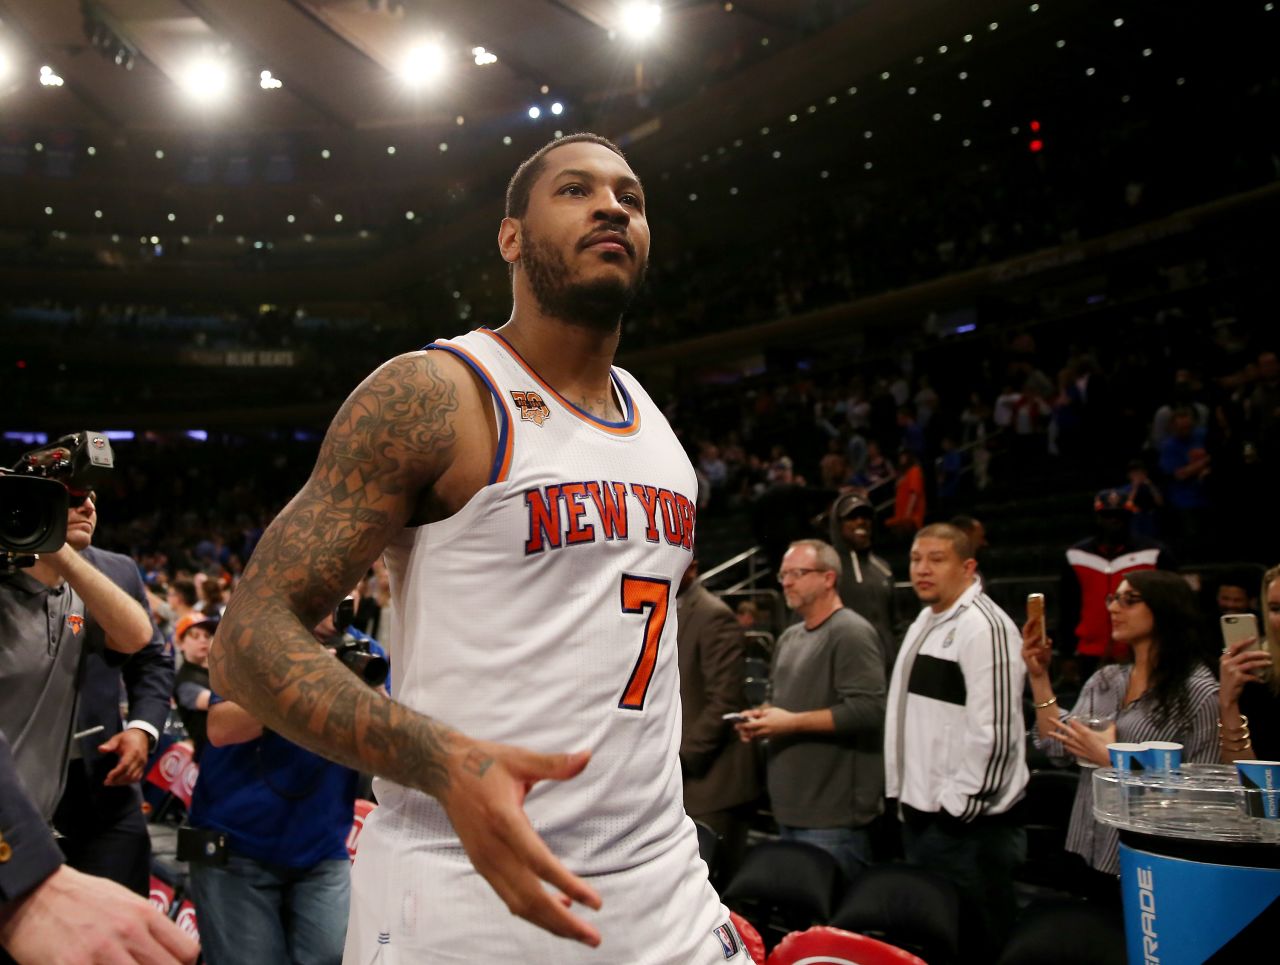 NBA star Carmelo Anthony is one of many athletes who sports a sleeve -- a series of tattoos covering his arm. On his right arm is a flaming basketball with his initials, representing his commitment to his sport. 